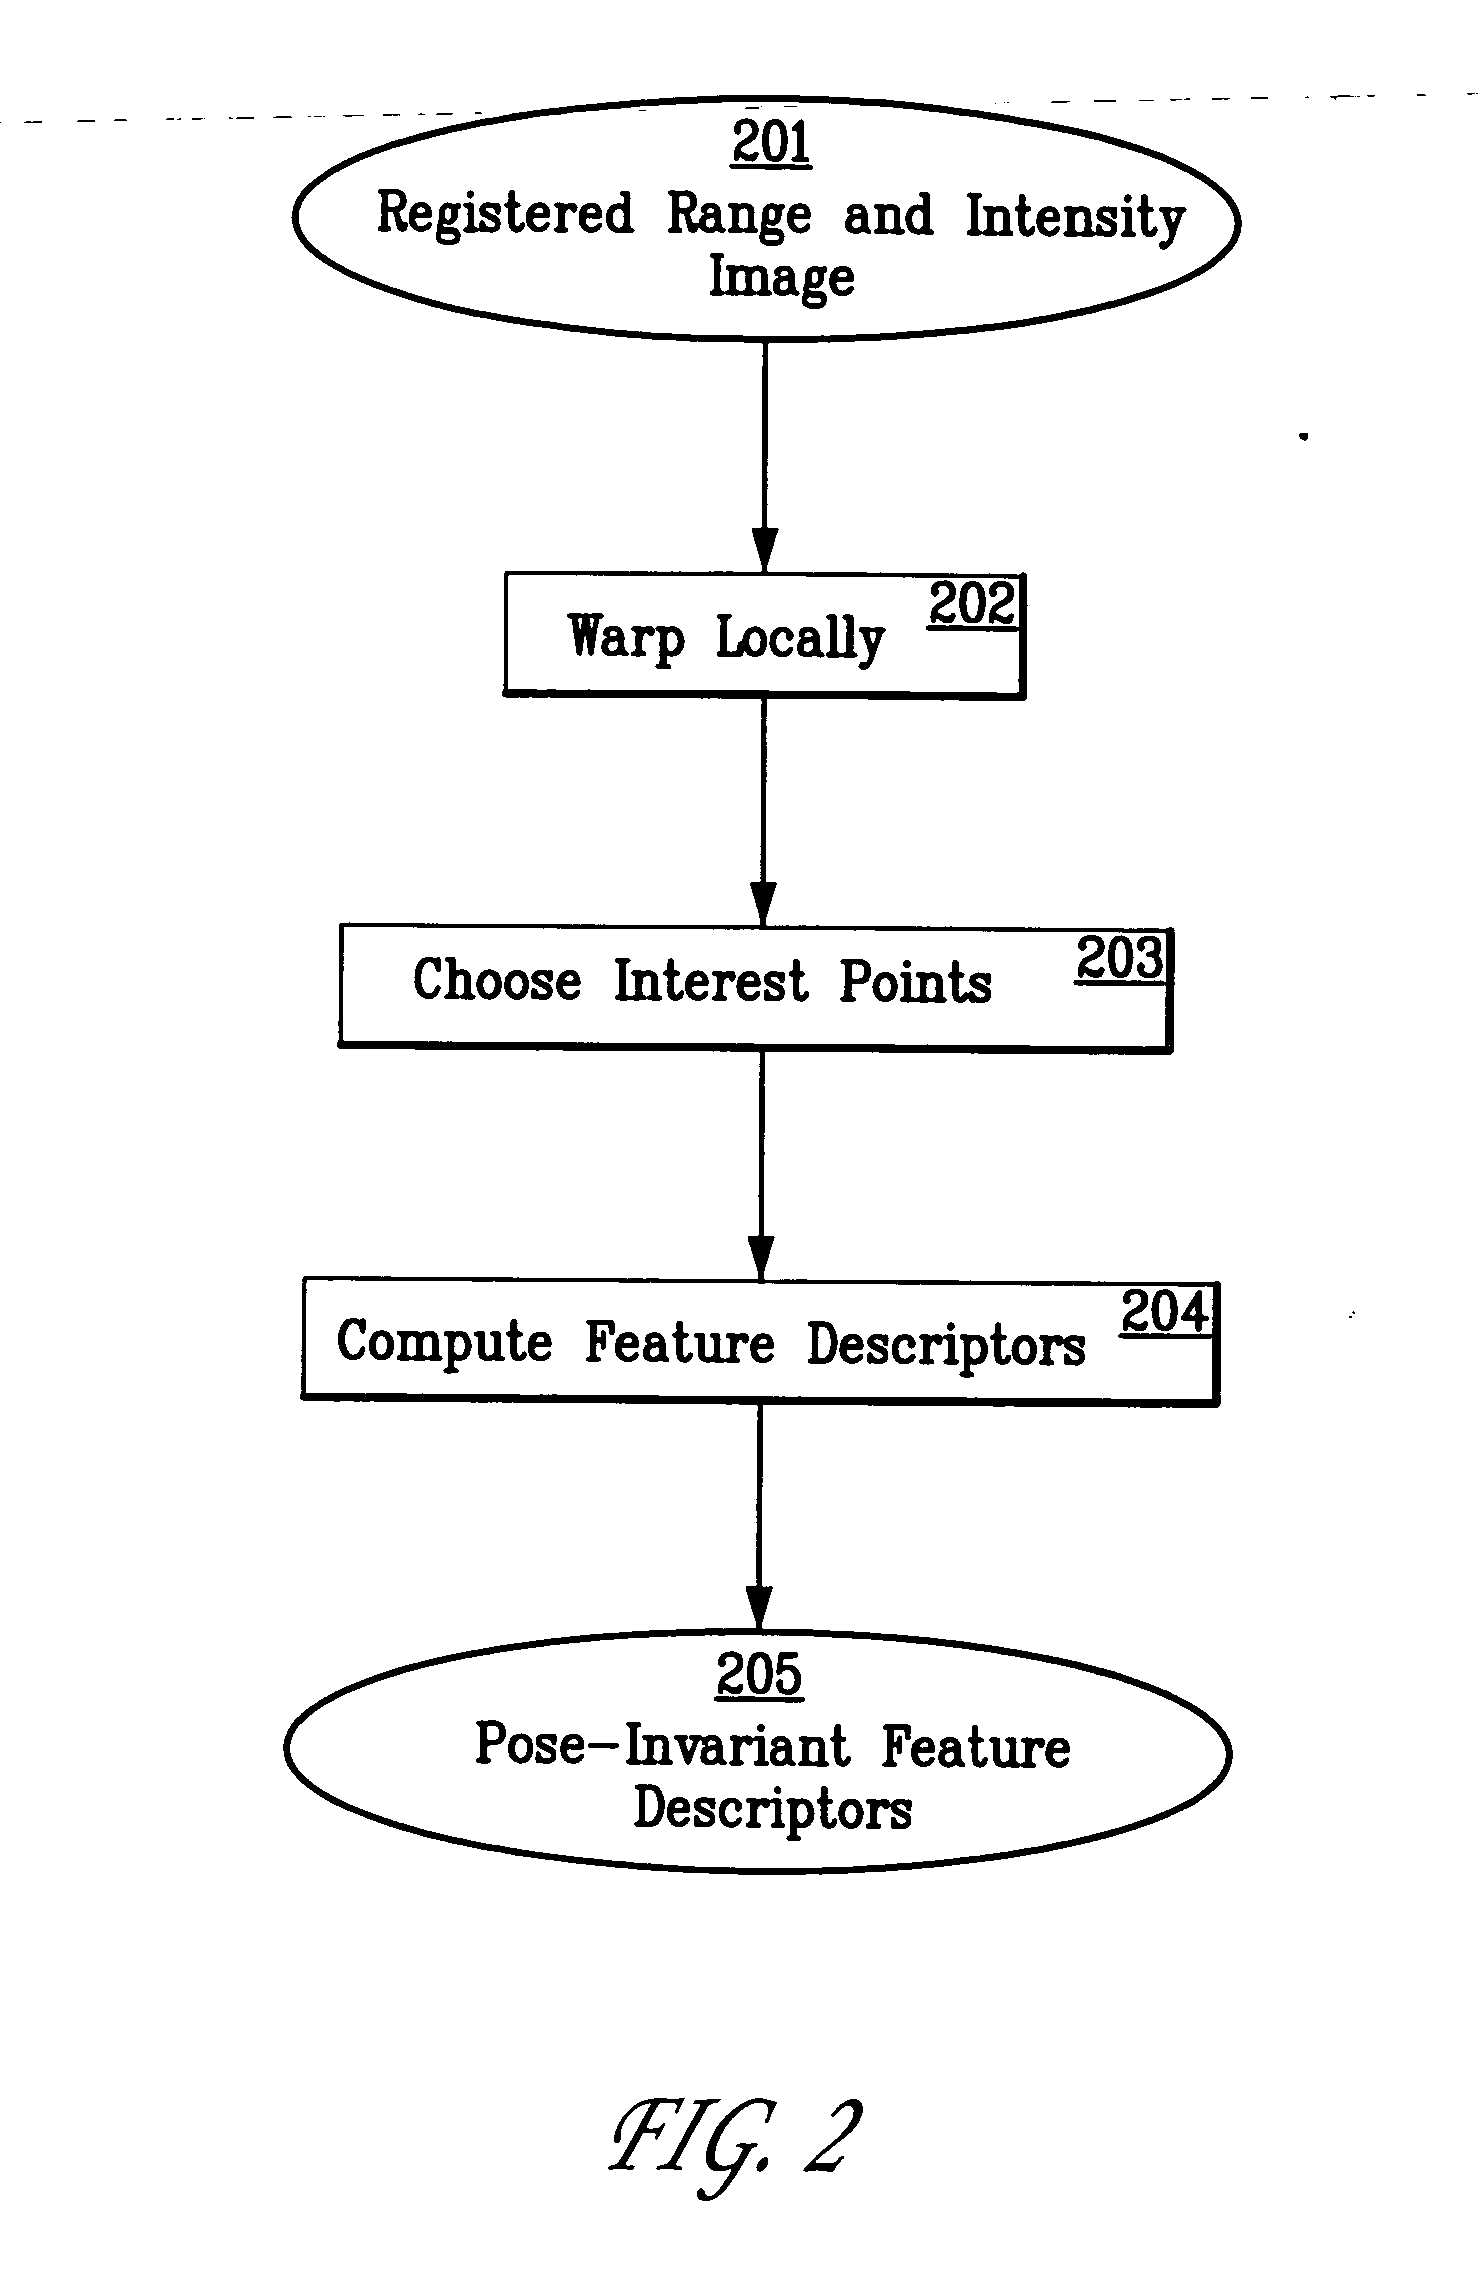 System and method for 3D object recognition using range and intensity